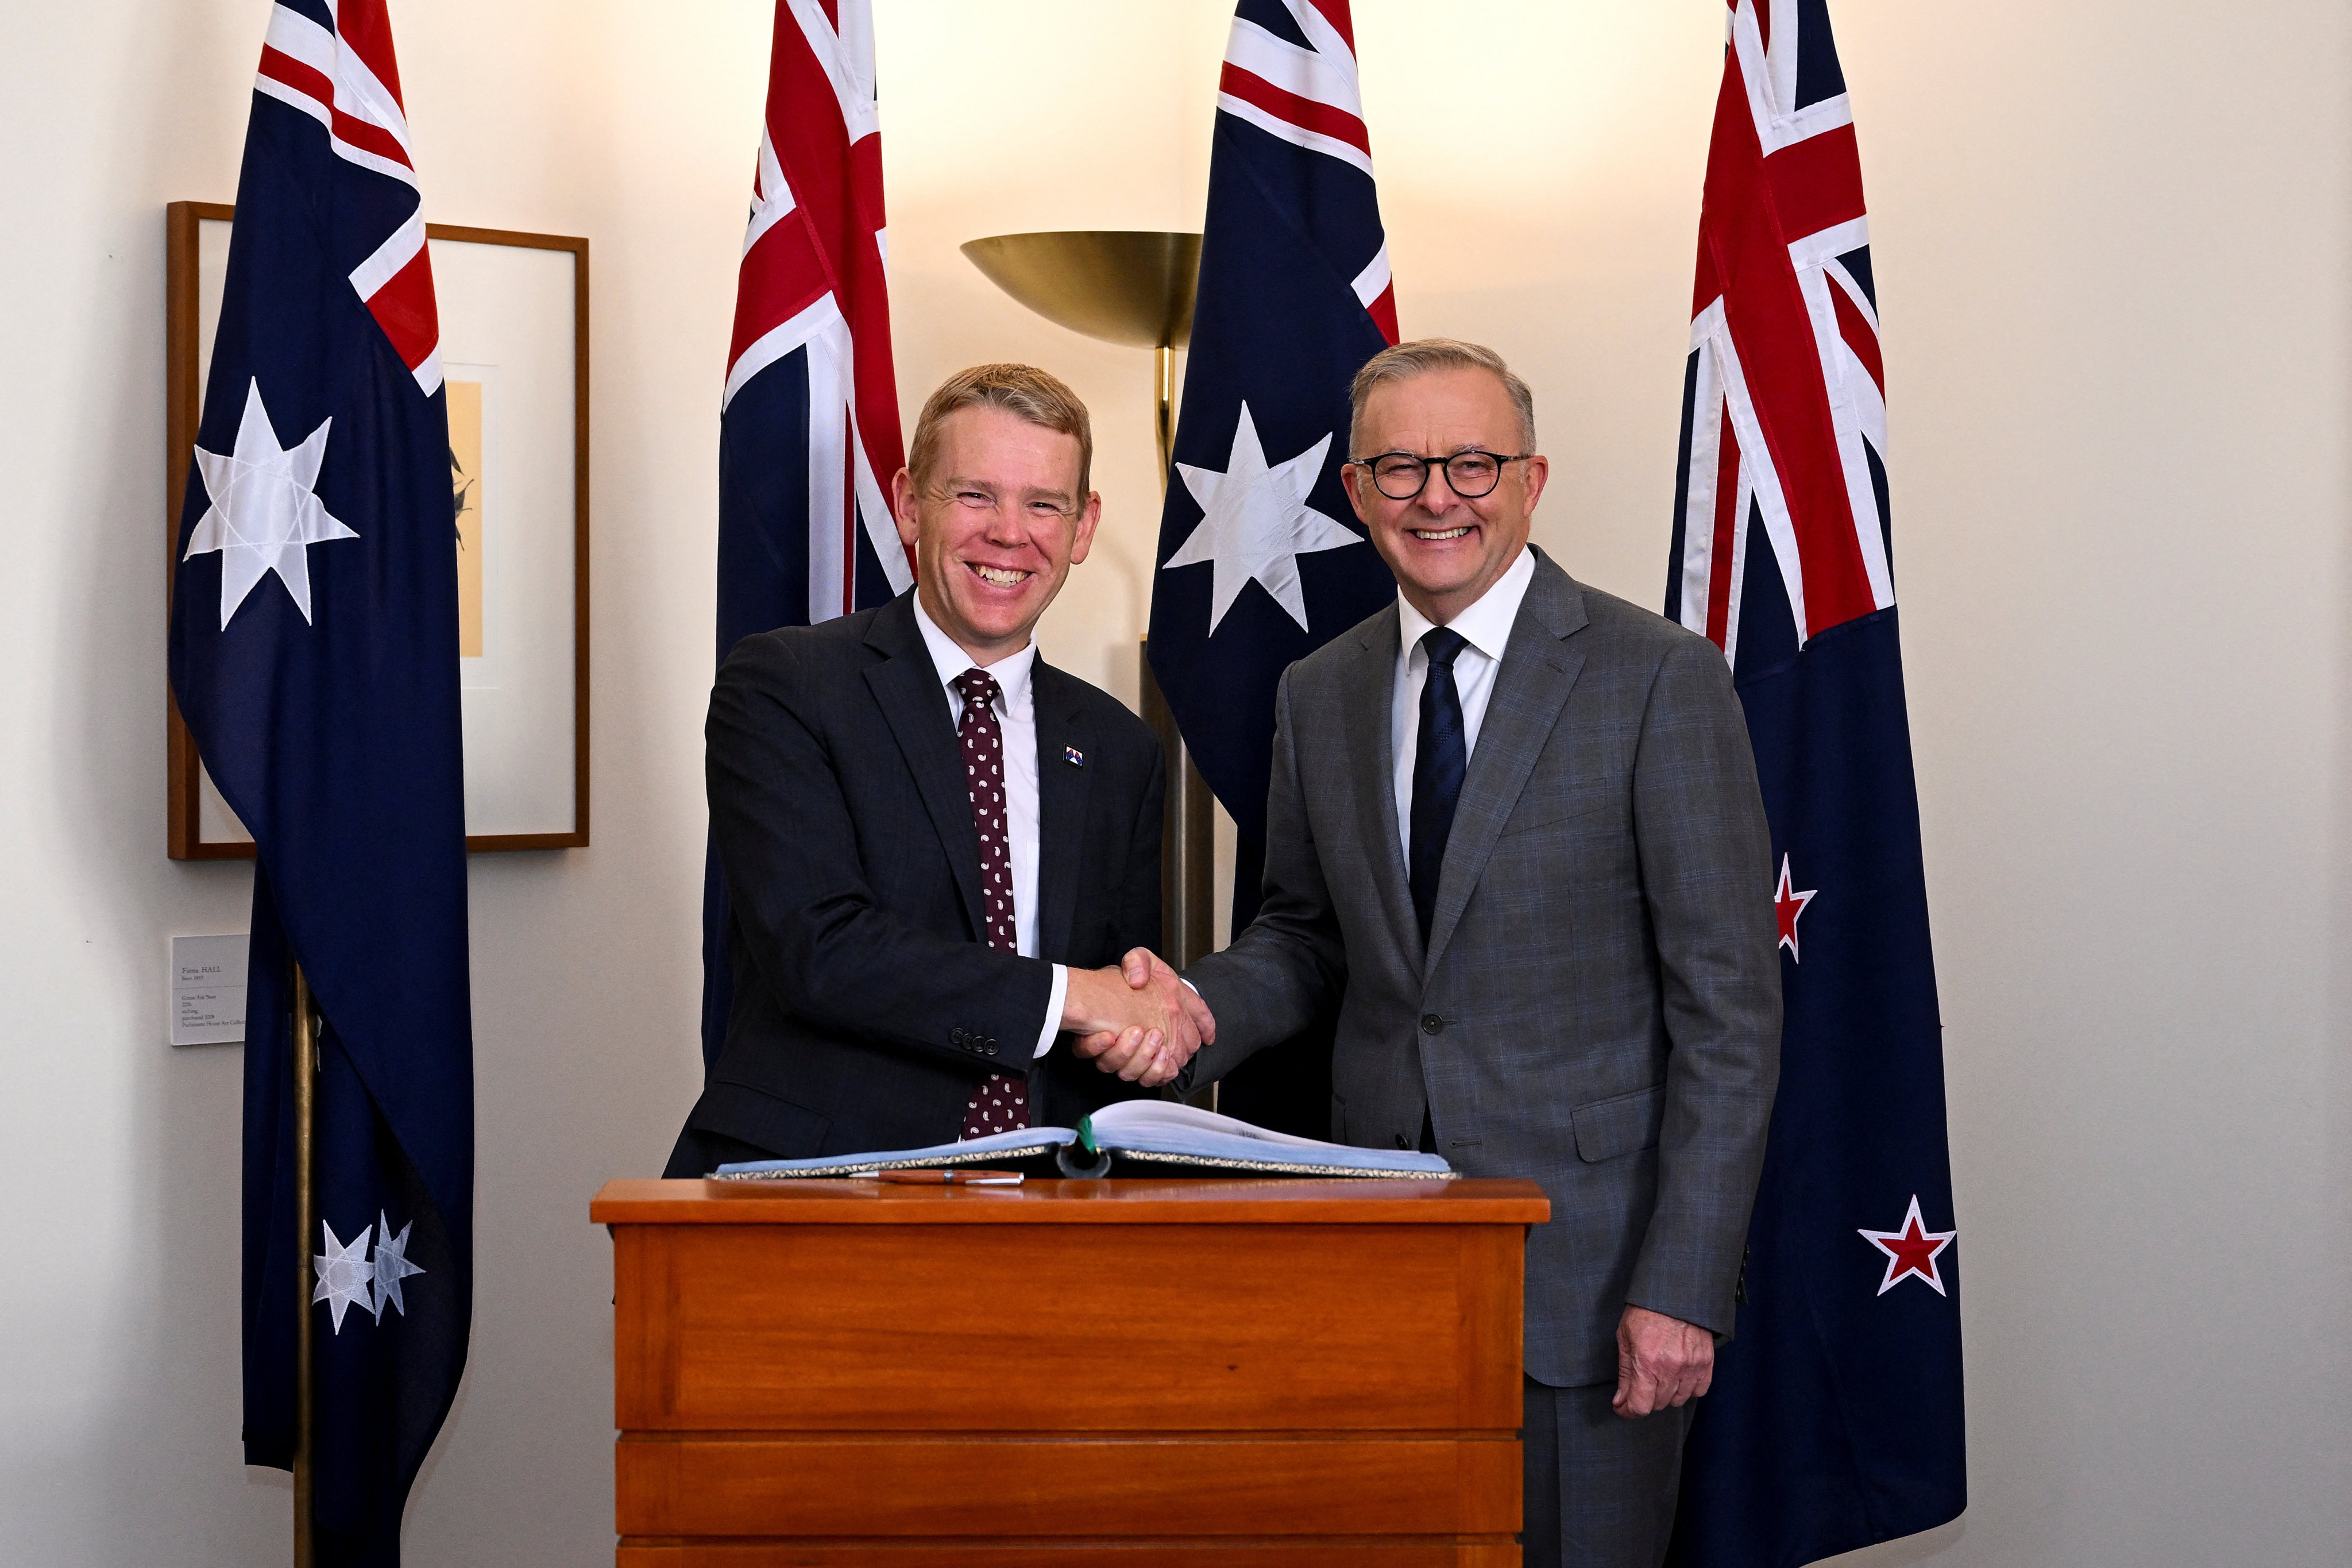 New Zealand Prime Minister Chris Hipkins shakes hands with Australian Prime Minister Anthony Albanese at Parliament House in Canberra on Tuesday. Photo: AAP Image via Reuters 